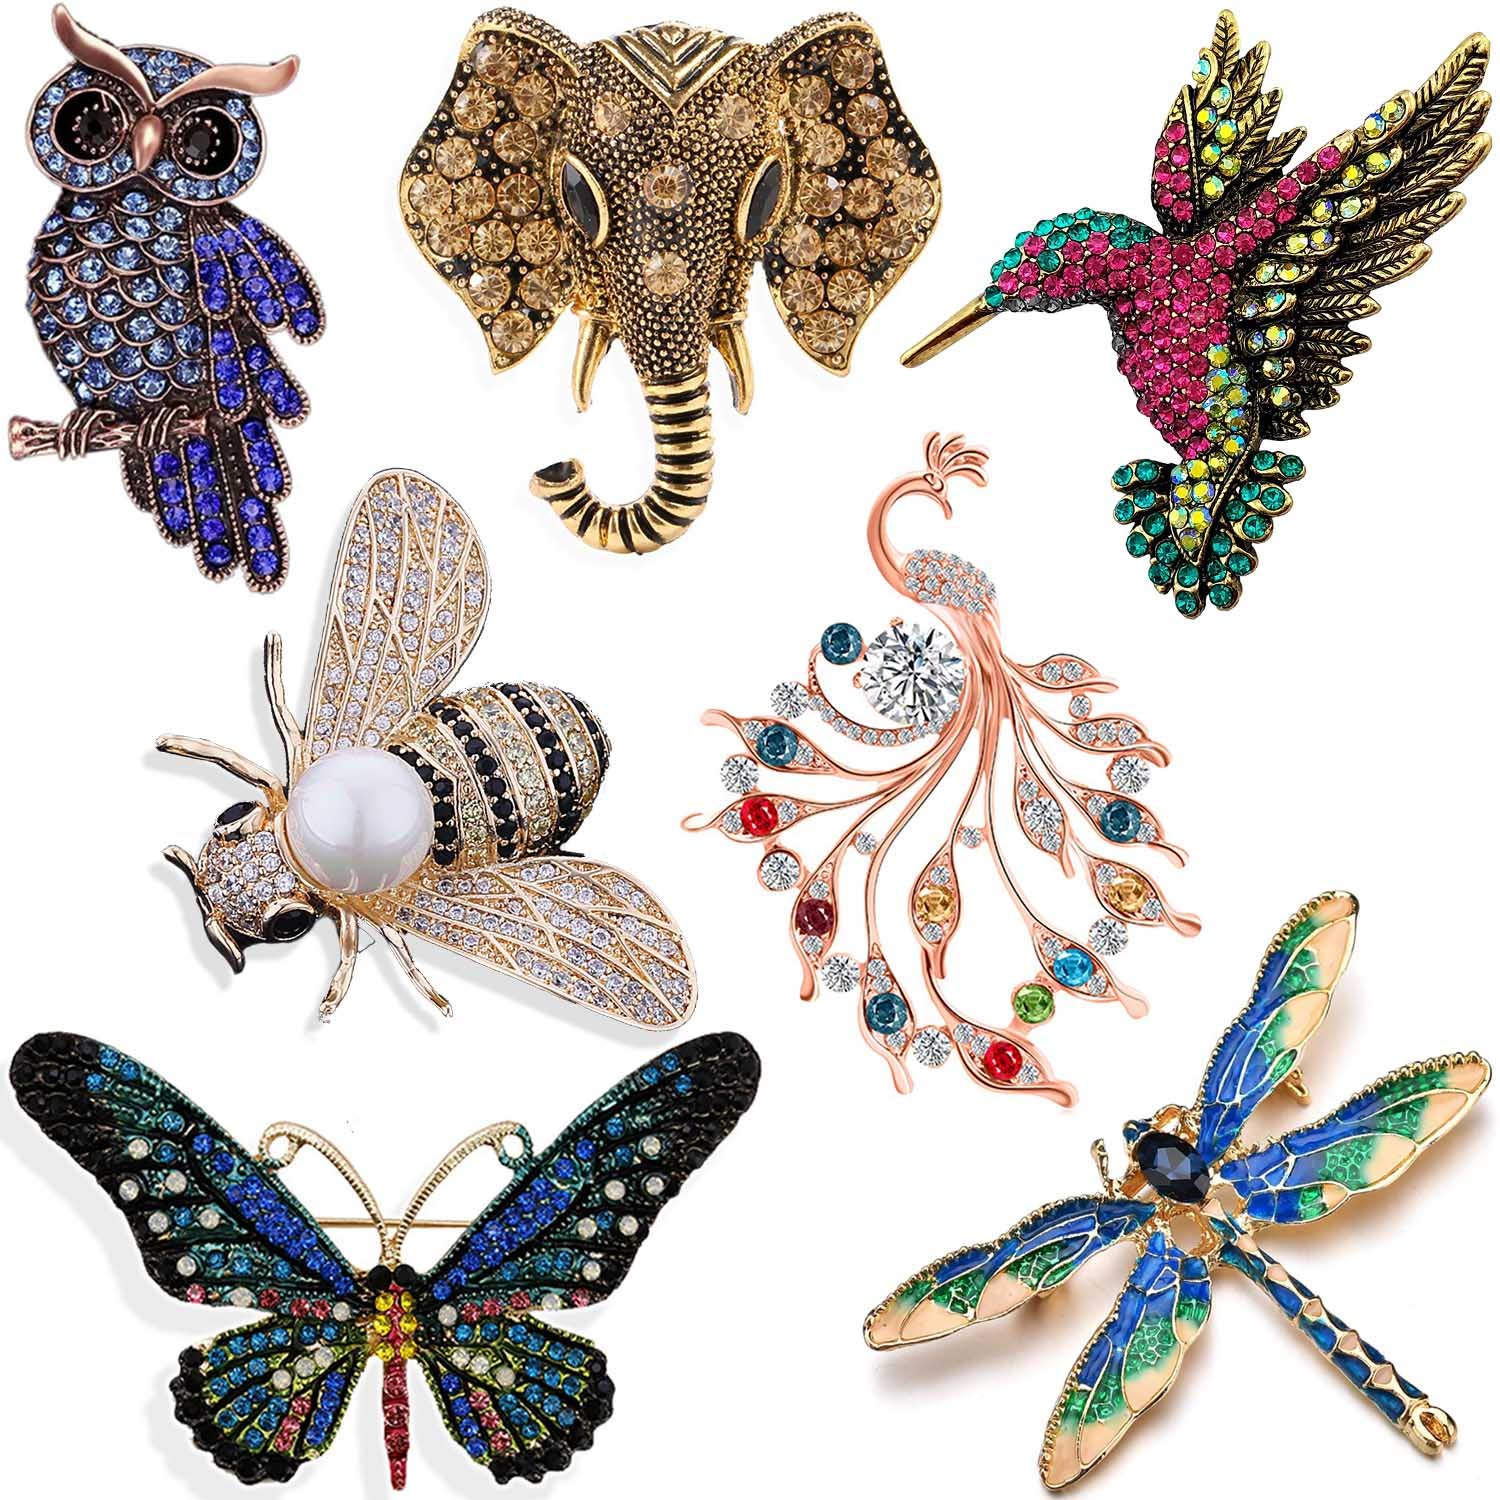 Women Brooch Set Crystal Pin Christmas Gifts Stocking Stuffers Vintage Animal Insect Elegant Flower Pins Brooches Bulk for Women Girls